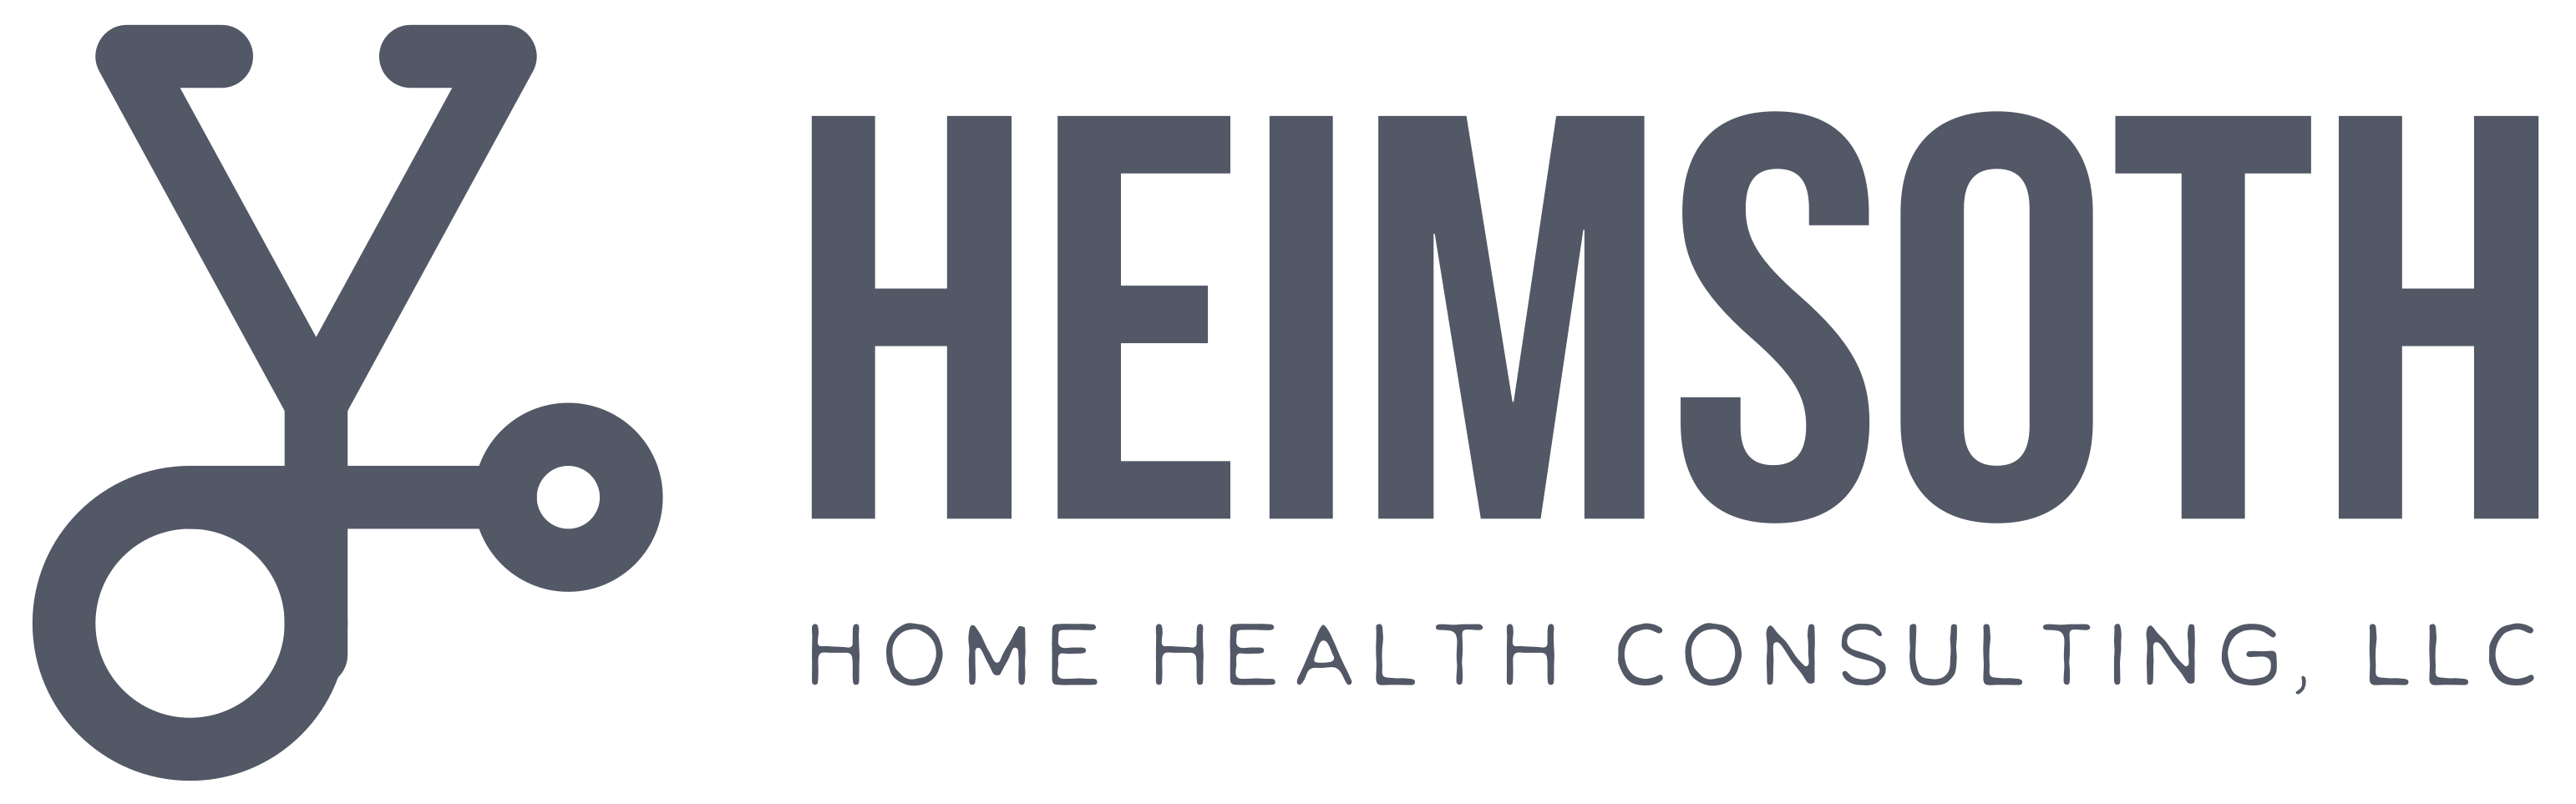 Heimsoth Home Health Consulting, LLC